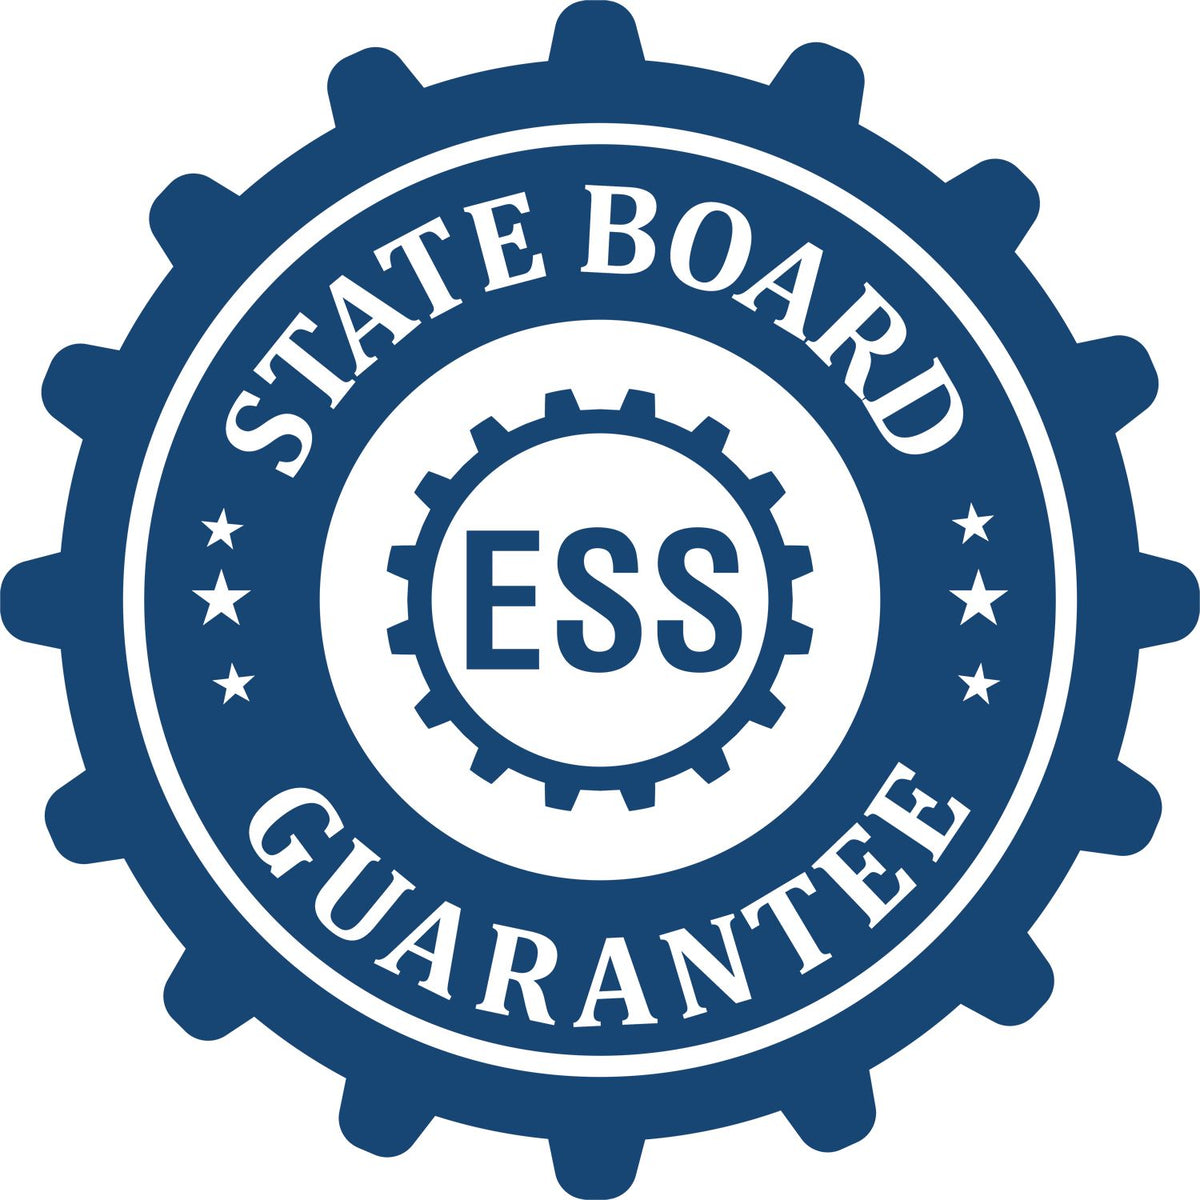 An emblem in a gear shape illustrating a state board guarantee for the Hybrid Idaho Land Surveyor Seal